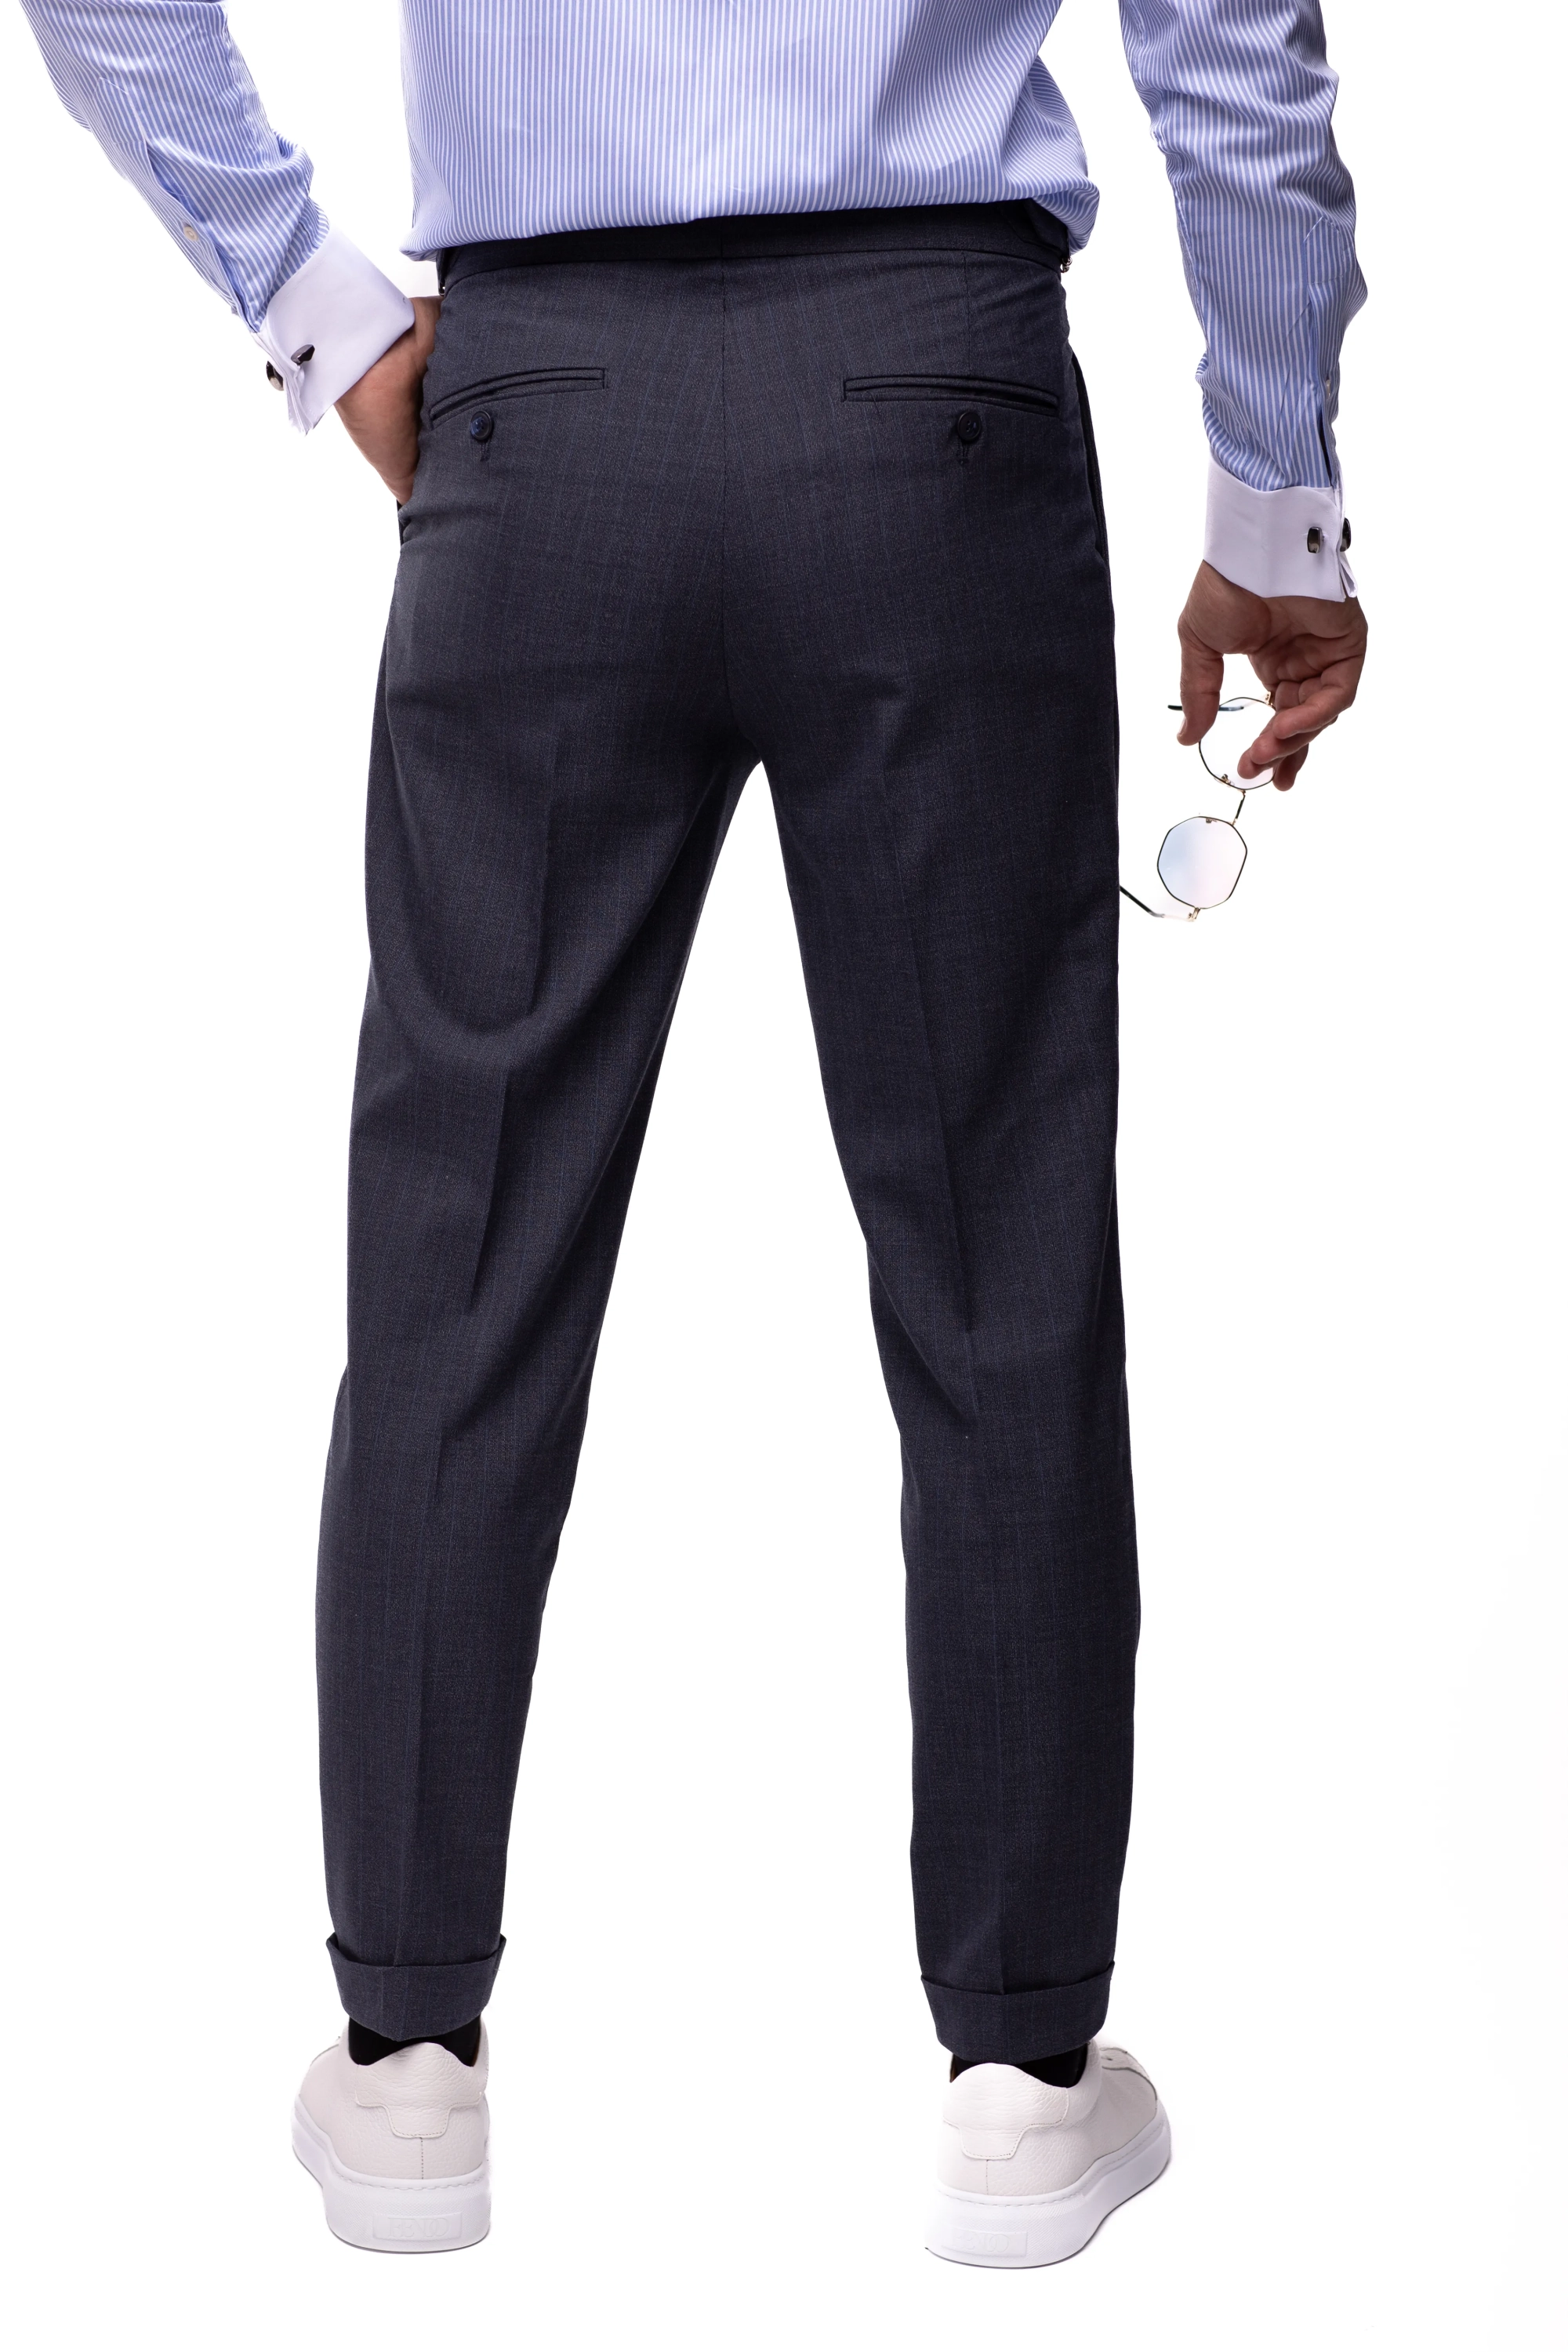 Shantung trousers with dark blue stripes